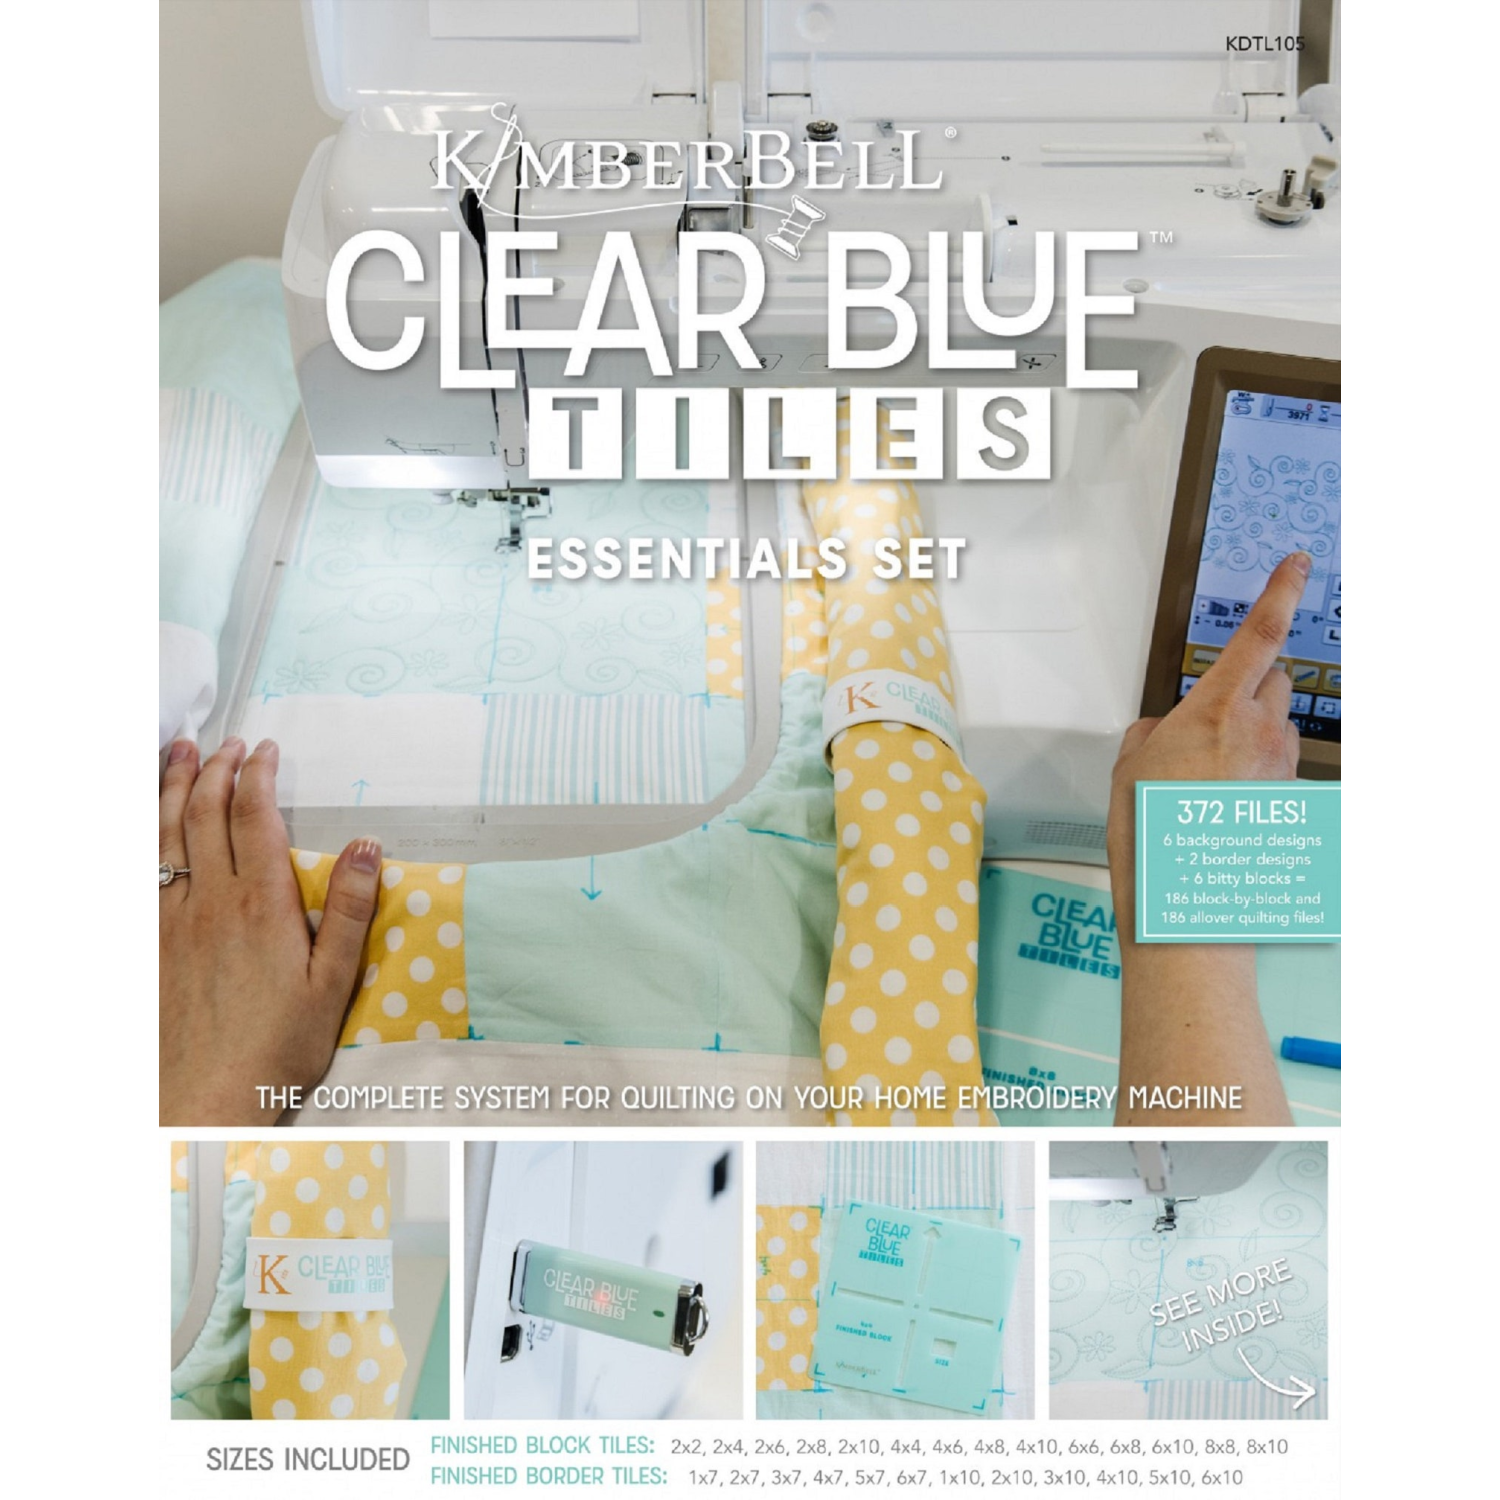 Clear blue tiles, embroidery, quilting